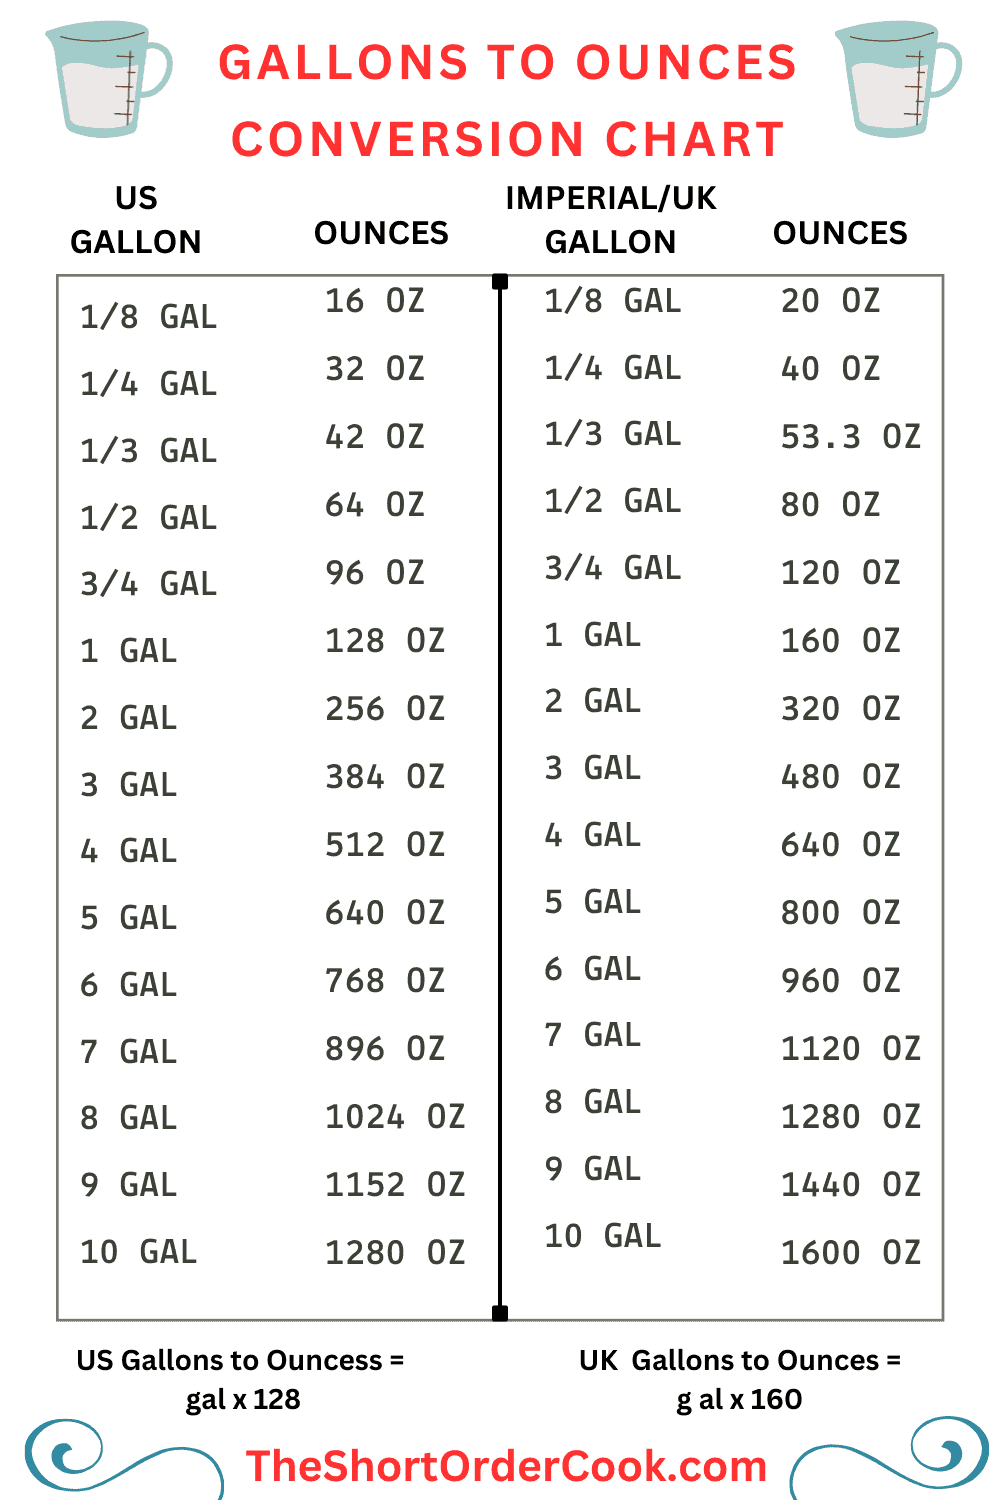 Gallons to Ounces Conversion Chart